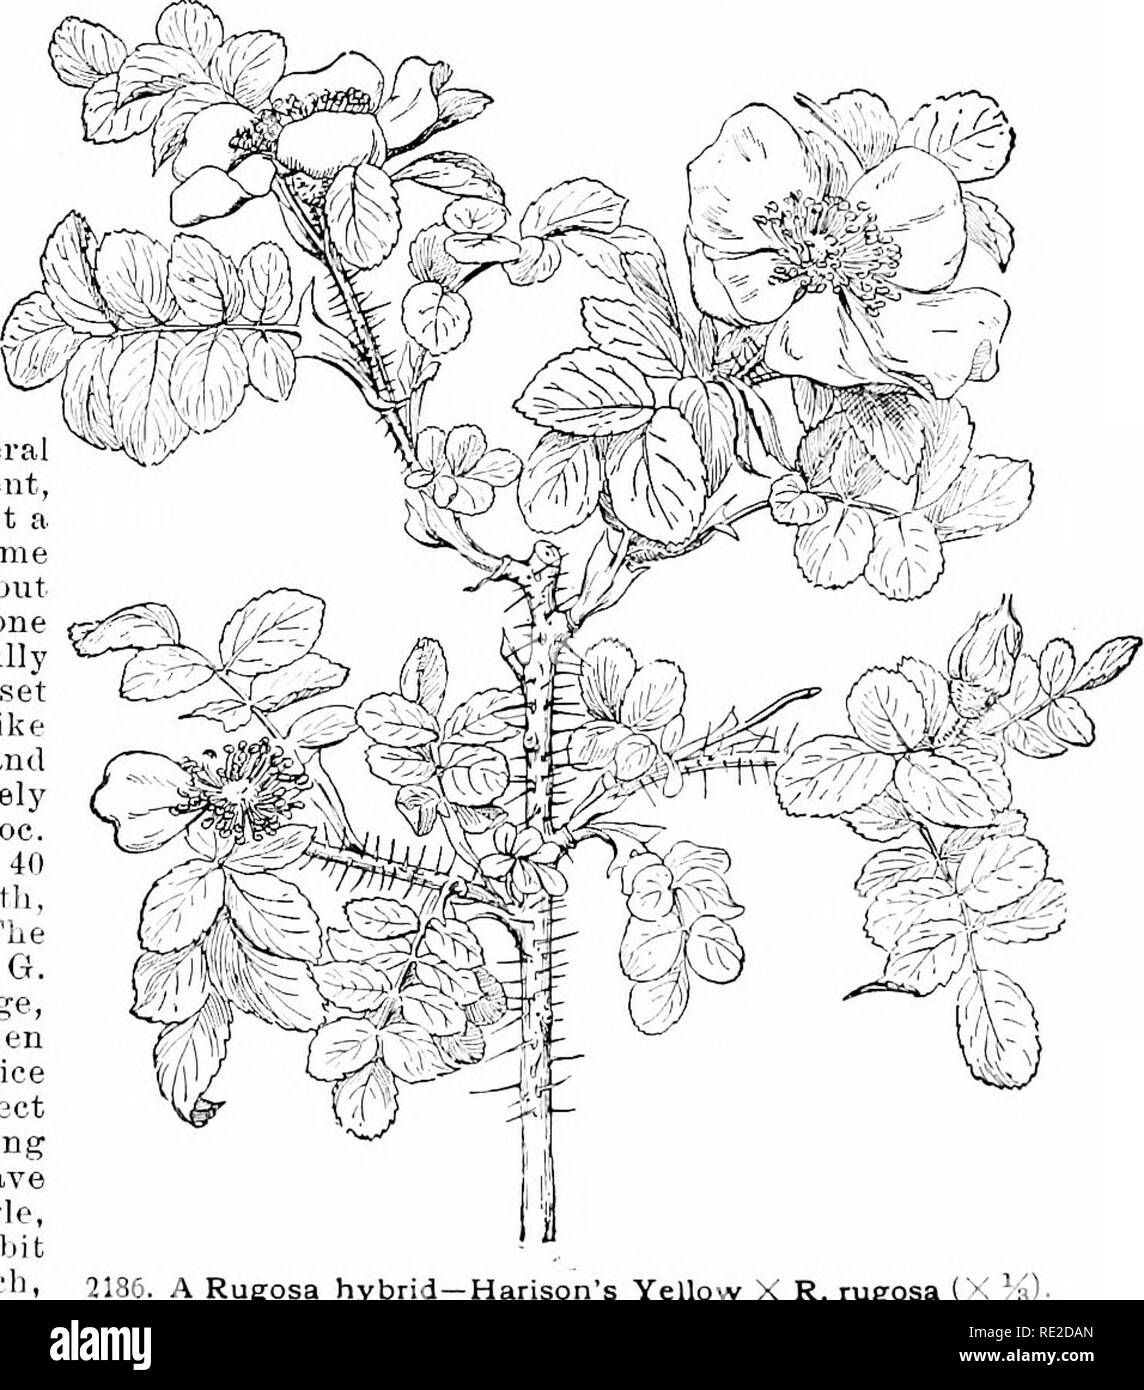 . Cyclopedia of American horticulture, comprising suggestions for cultivation of horticultural plants, descriptions of the species of fruits, vegetables, flowers, and ornamental plants sold in the United States and Canada, together with geographical and biographical sketches. Gardening. Xlff^f^^' 2185. Rosa rugosa, var. Kaiserin (X 14). J. muUifhn-a (the .Tajiane.se type), B. rugosa and -R. )Vlrhui-&lt;ti(nta. The curliest experiments were made with B. iiiiiKiflora. the object being: first to obtain colored flowers and afterwards to get double ones, but always to keep the liardiness and habit Stock Photo